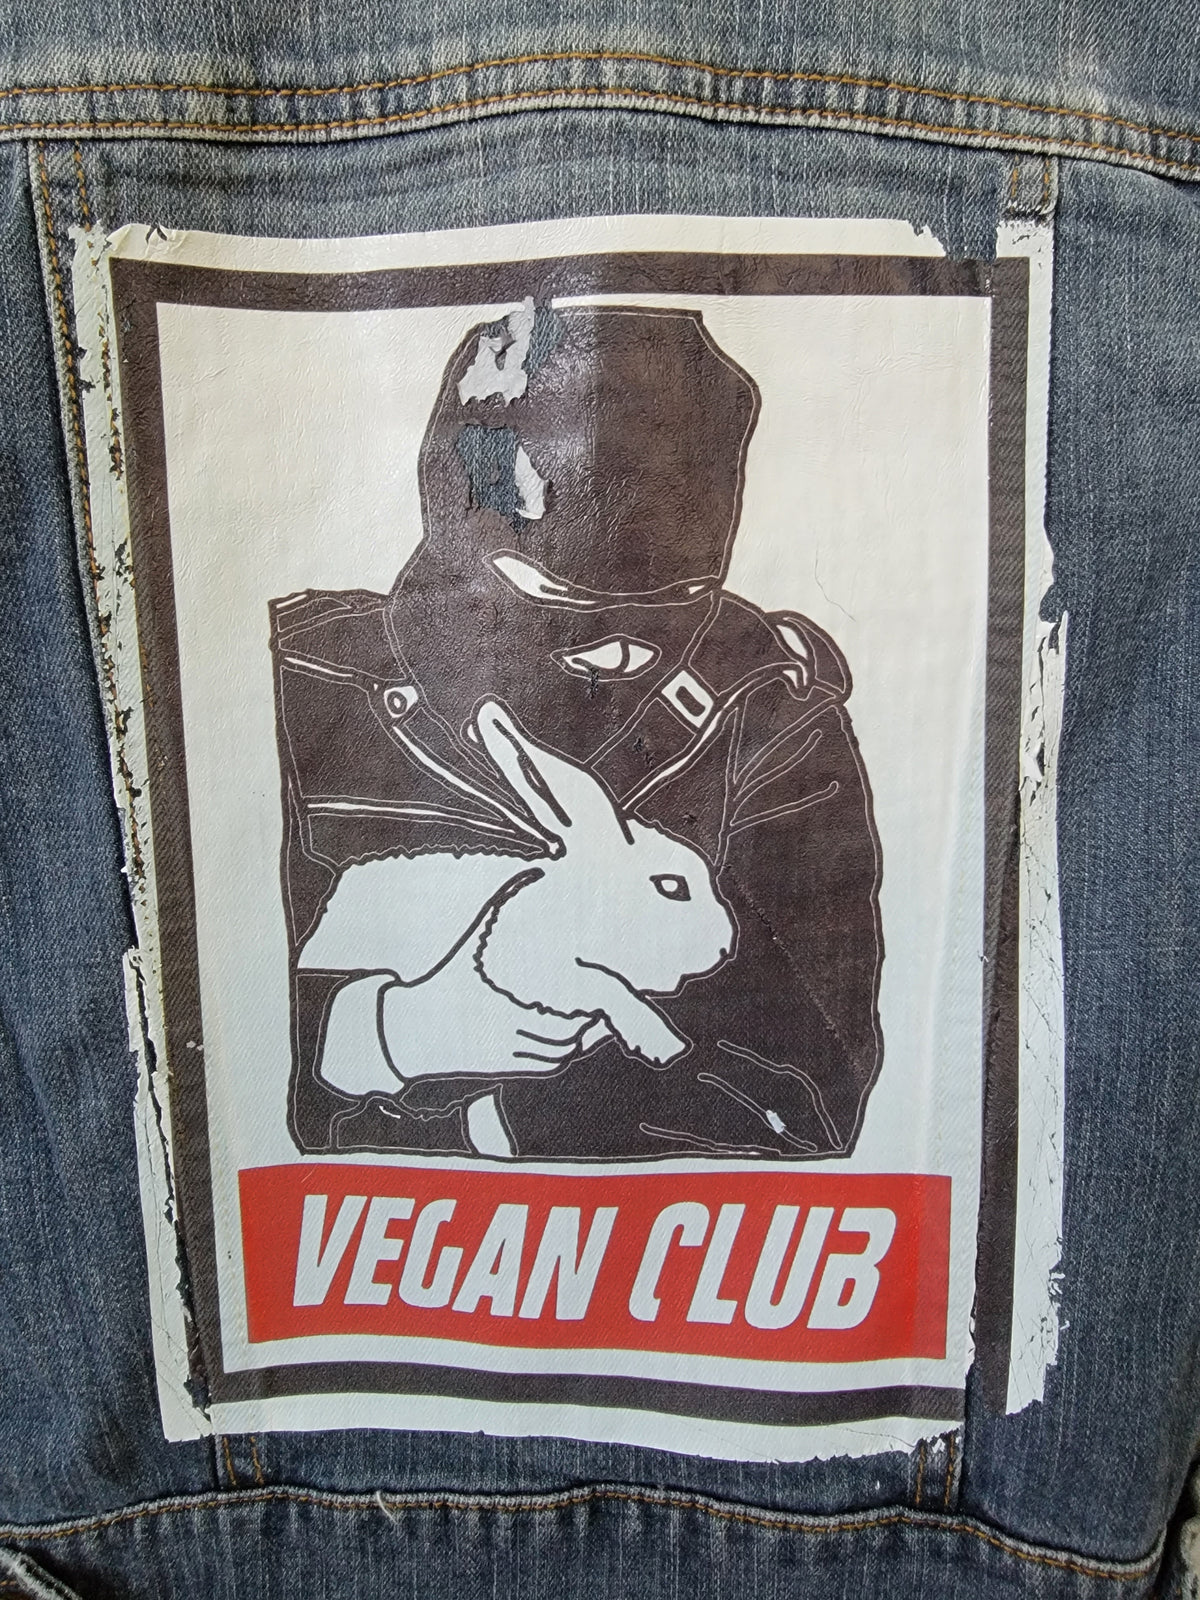 SOLD OUT - One of a Kind Upcycled Vegan Club Jean Jacket feat ALF saving a rabbit in color